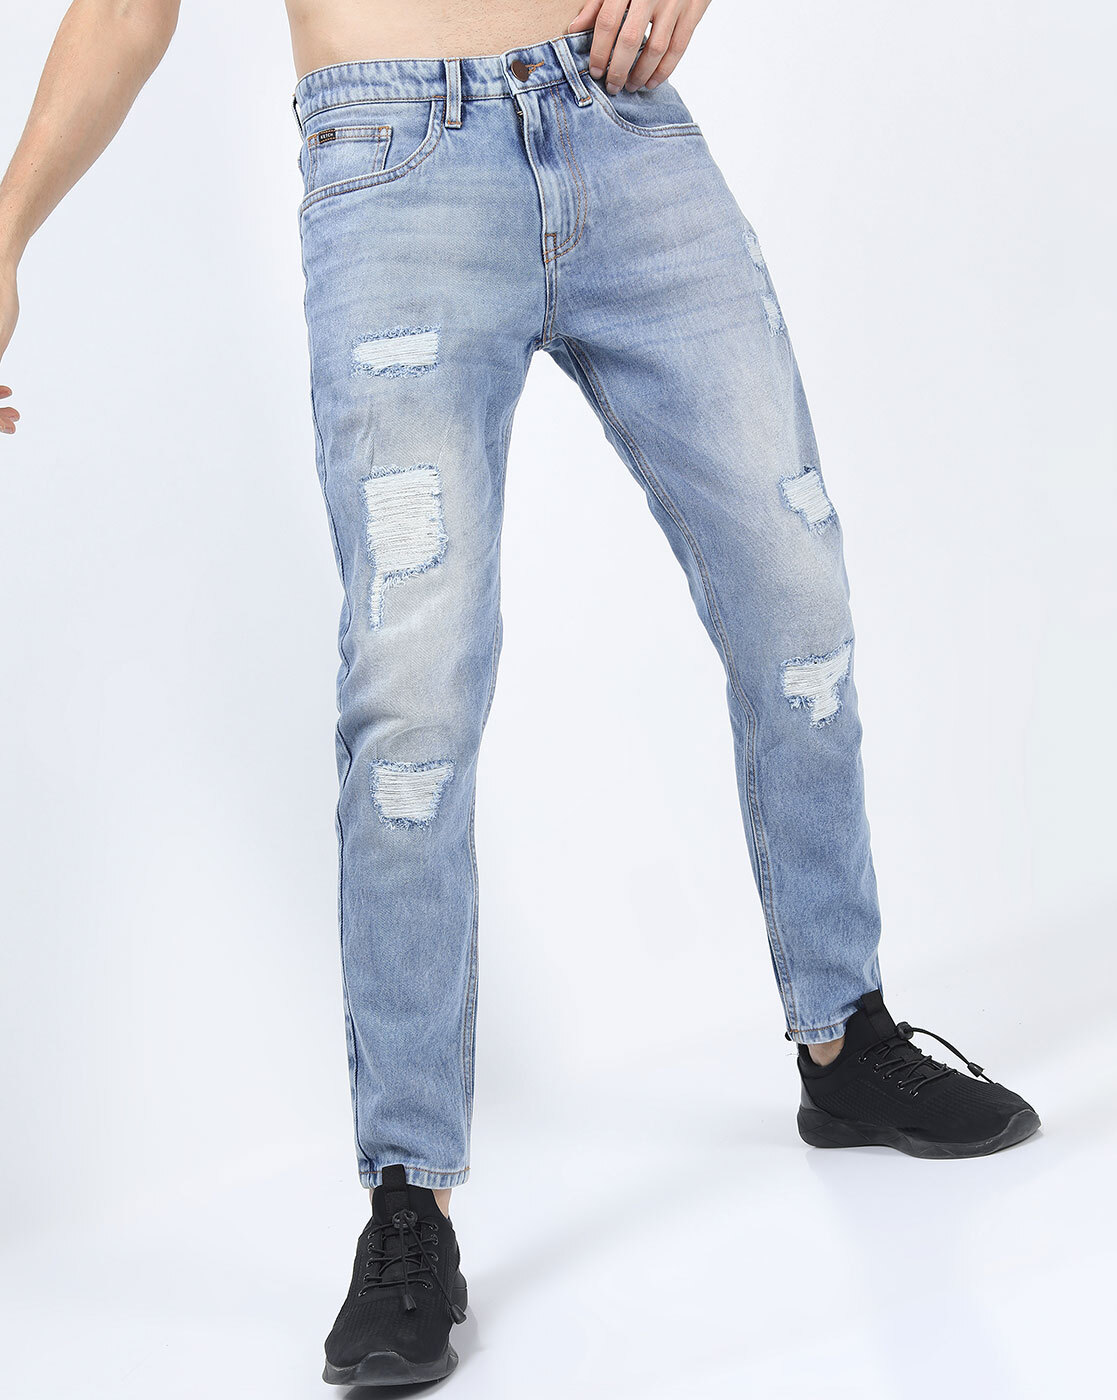 Men Ripped Jeans Wholesalers - Get Best Price from Manufacturers &  Suppliers in India